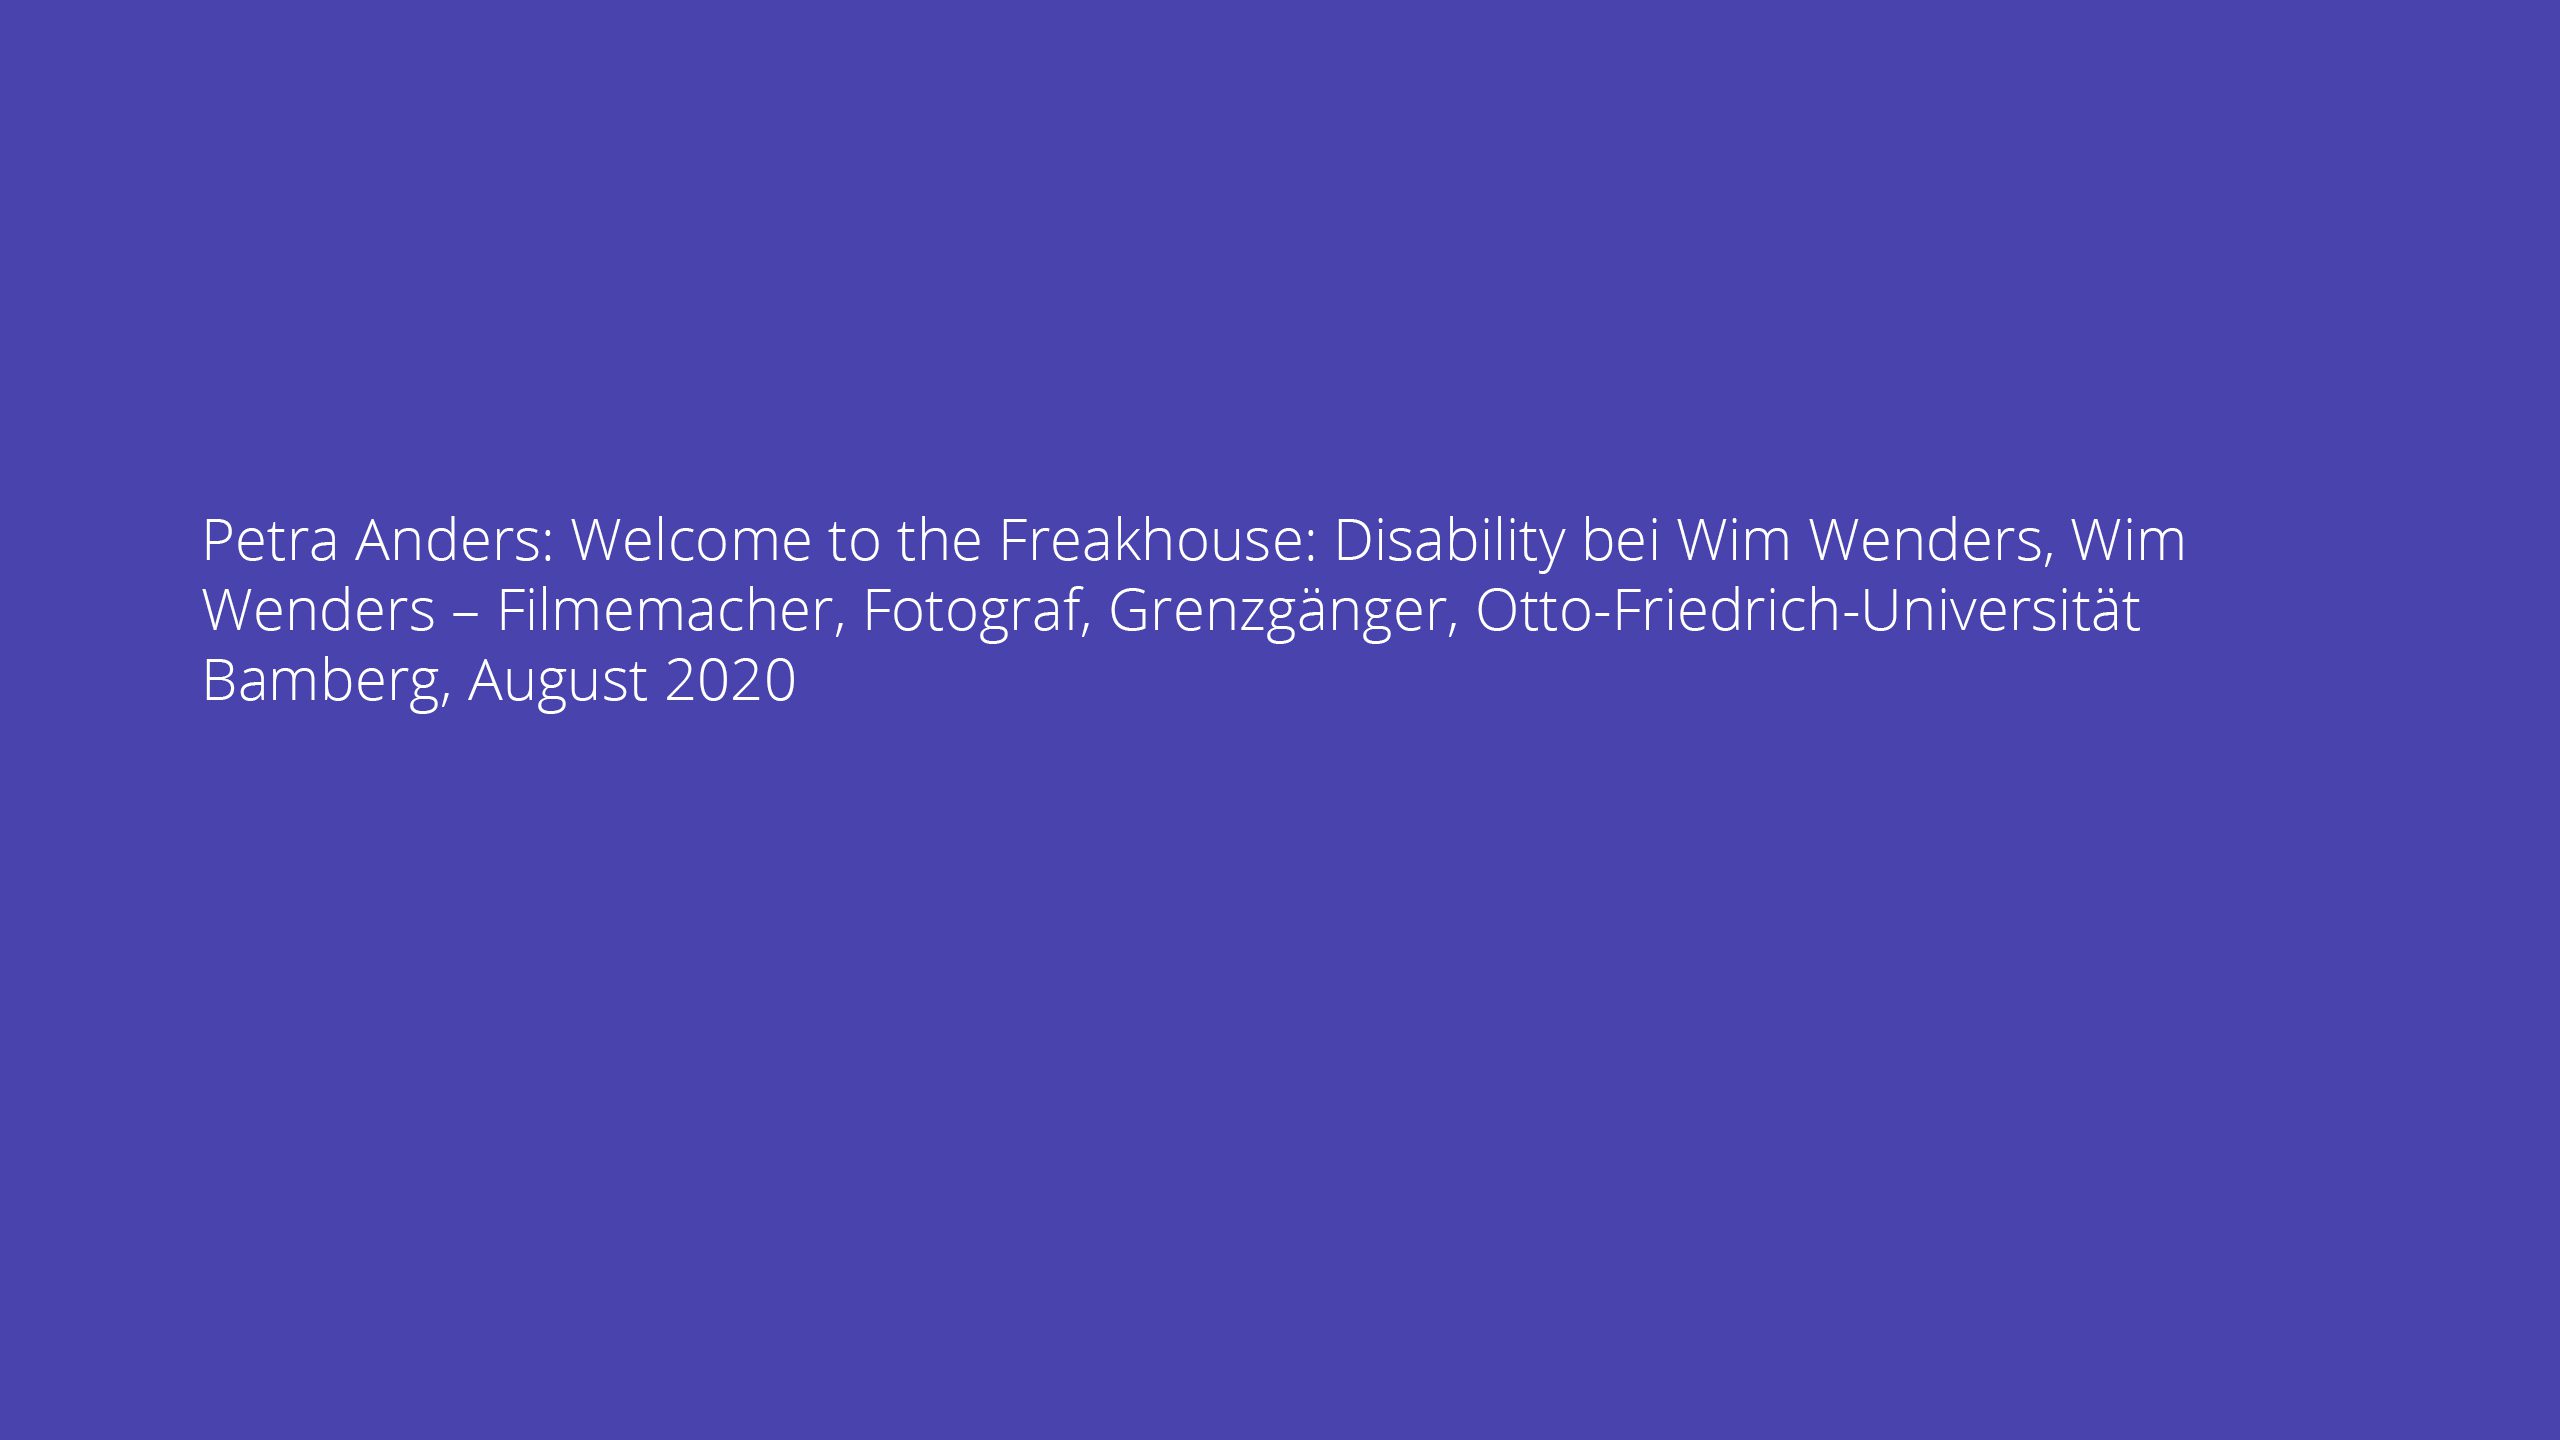 Petra Anders: Welcome to the Freakhouse: Disability bei Wim Wenders, Wim Wenders – Filmemacher, Fotograf, Grenzgänger, Otto-Friedrich-Universität Bamberg, August 2020